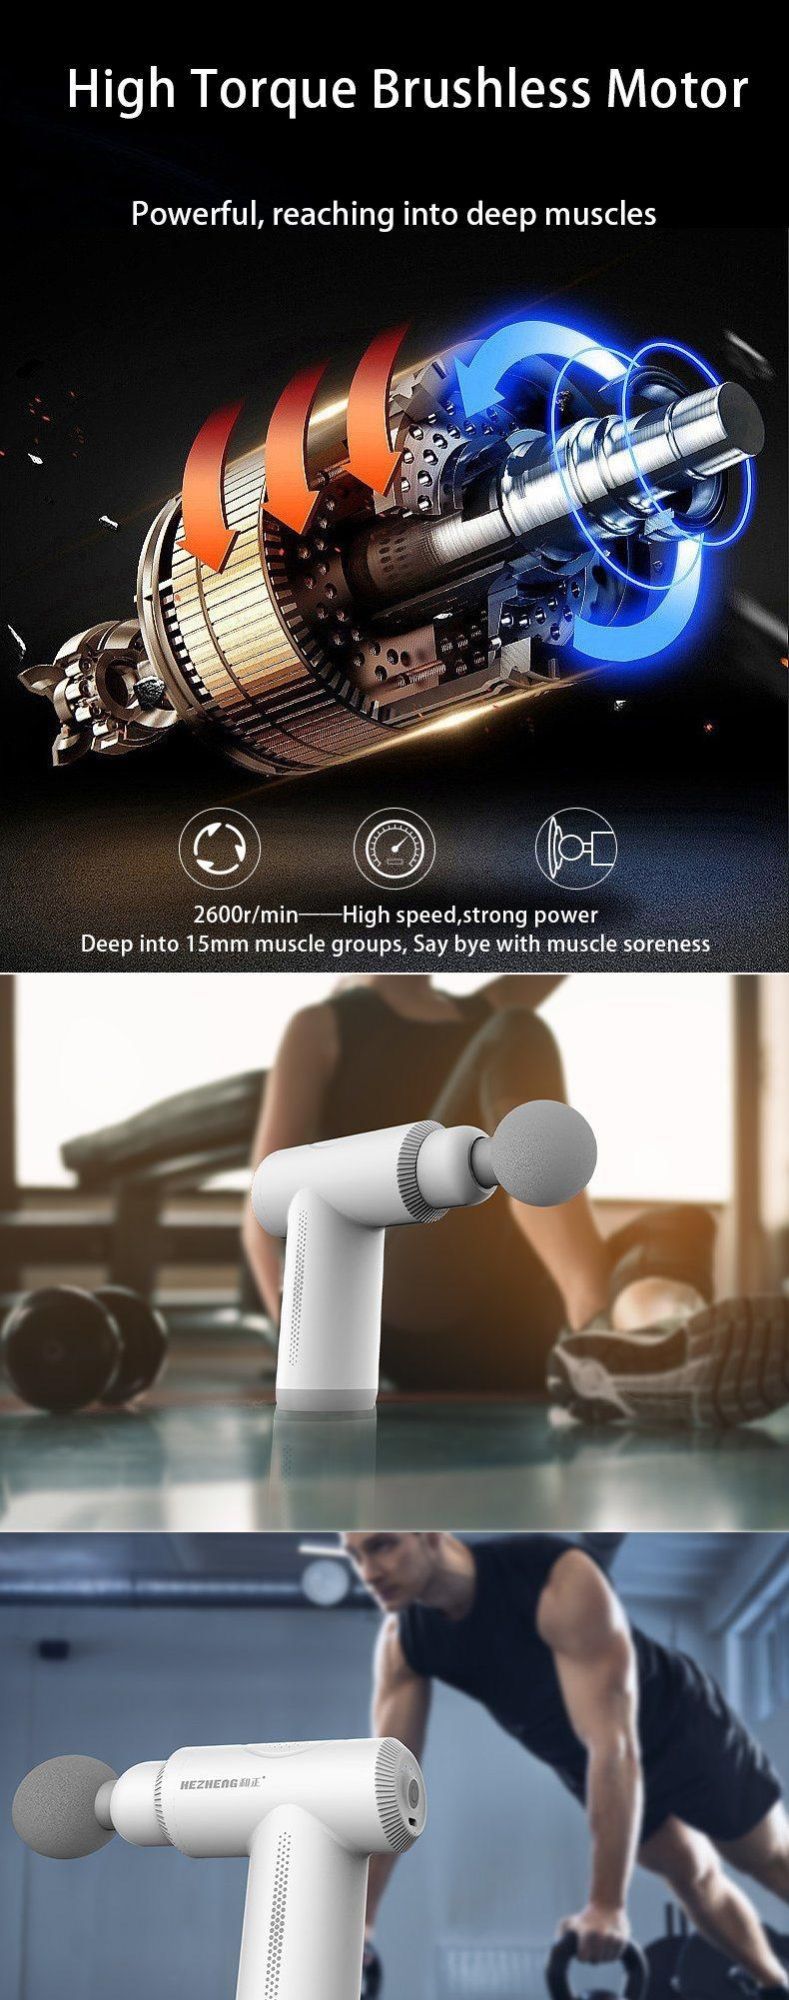 All-New 4th Generation Percussive Therapy Deep Tissue Muscle Treatment Massage Gun